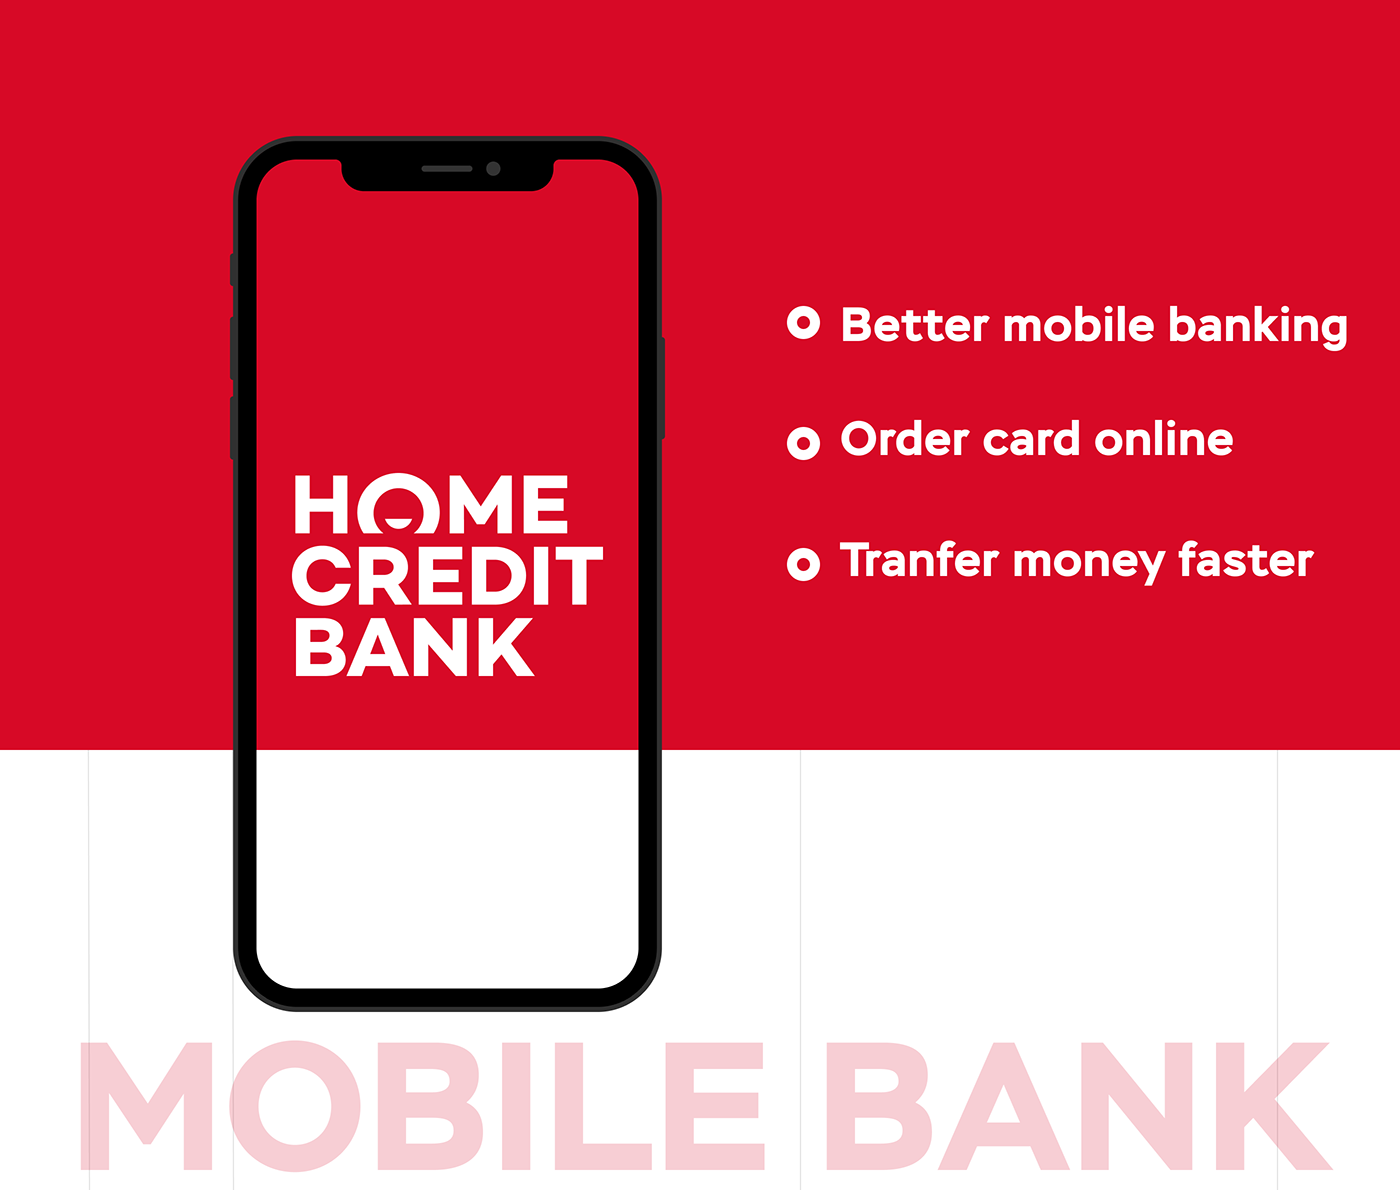 Home Credit Mobile Bank Better Banking Experience On Behance